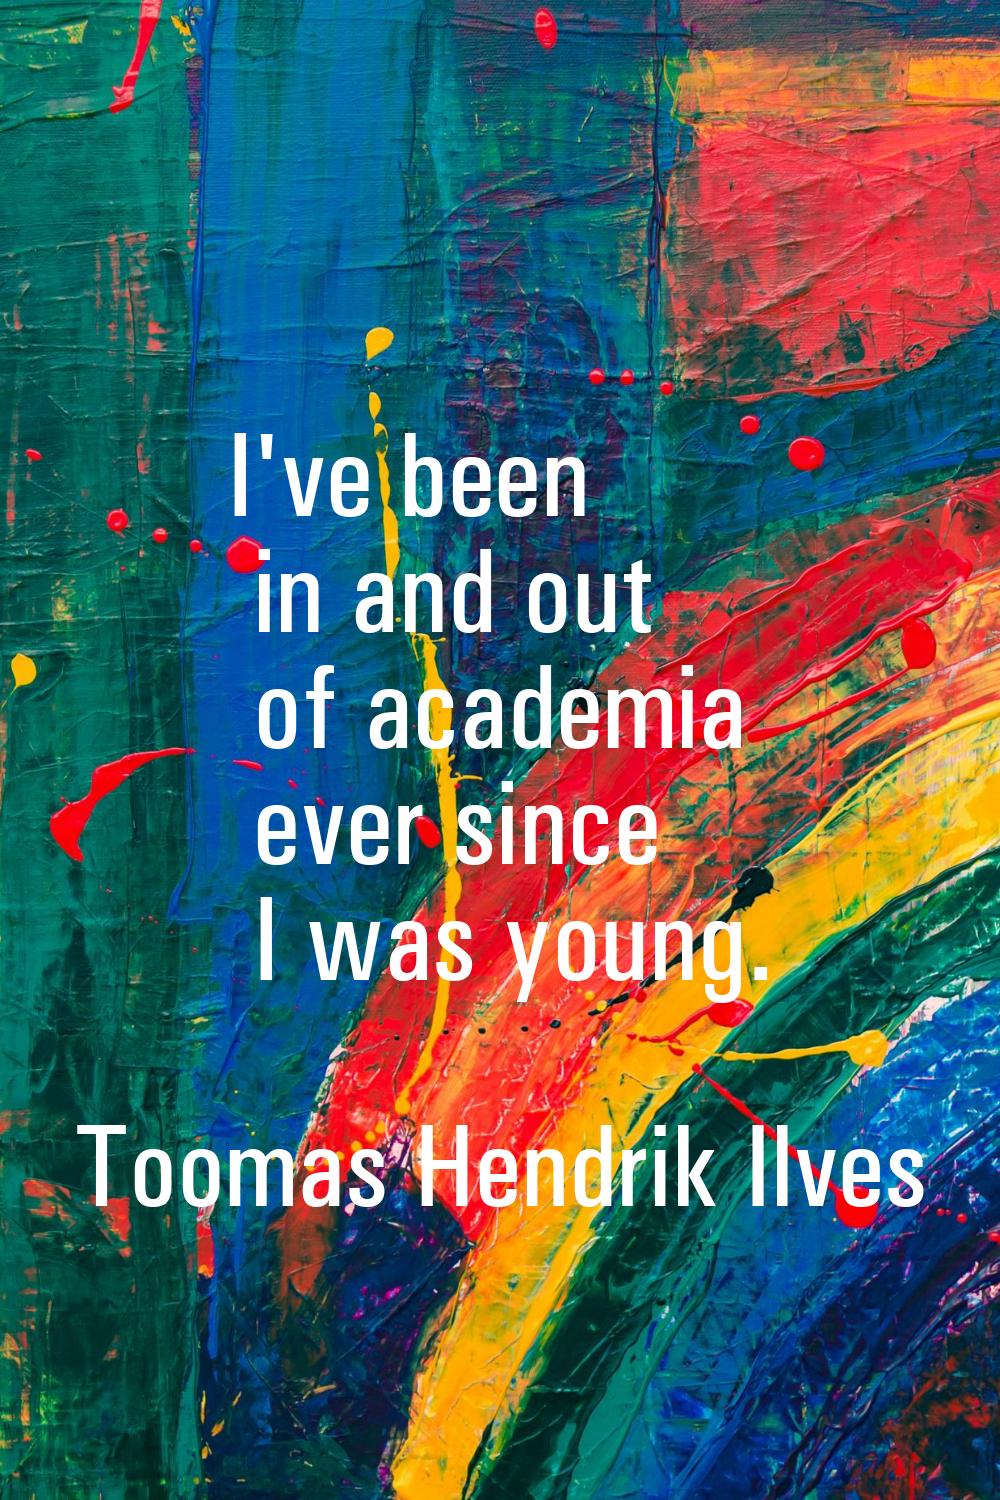 I've been in and out of academia ever since I was young.